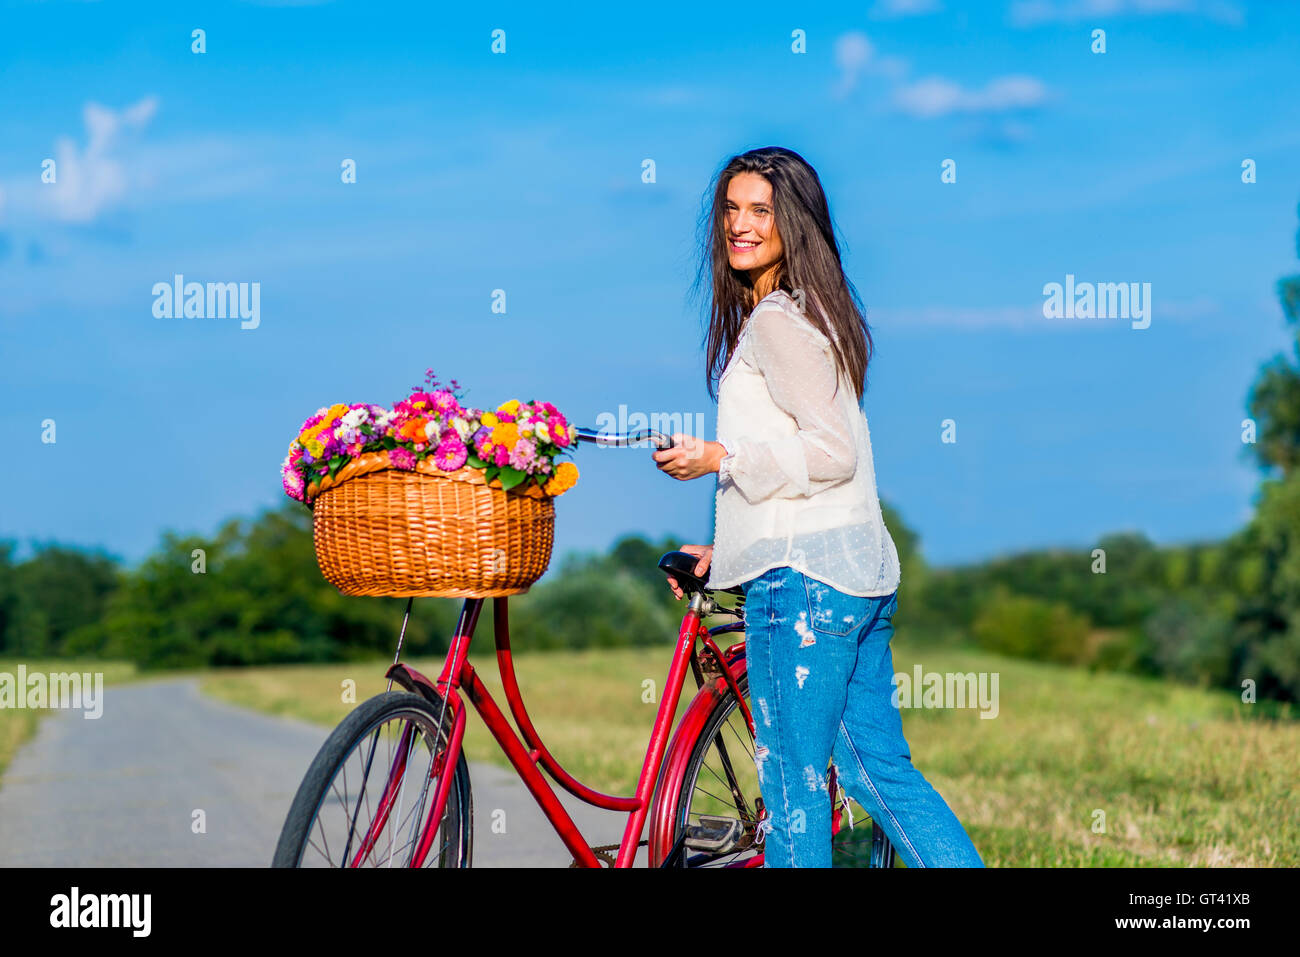 Young girl posing by a bicycle with a basket full of flowers Stock Photo